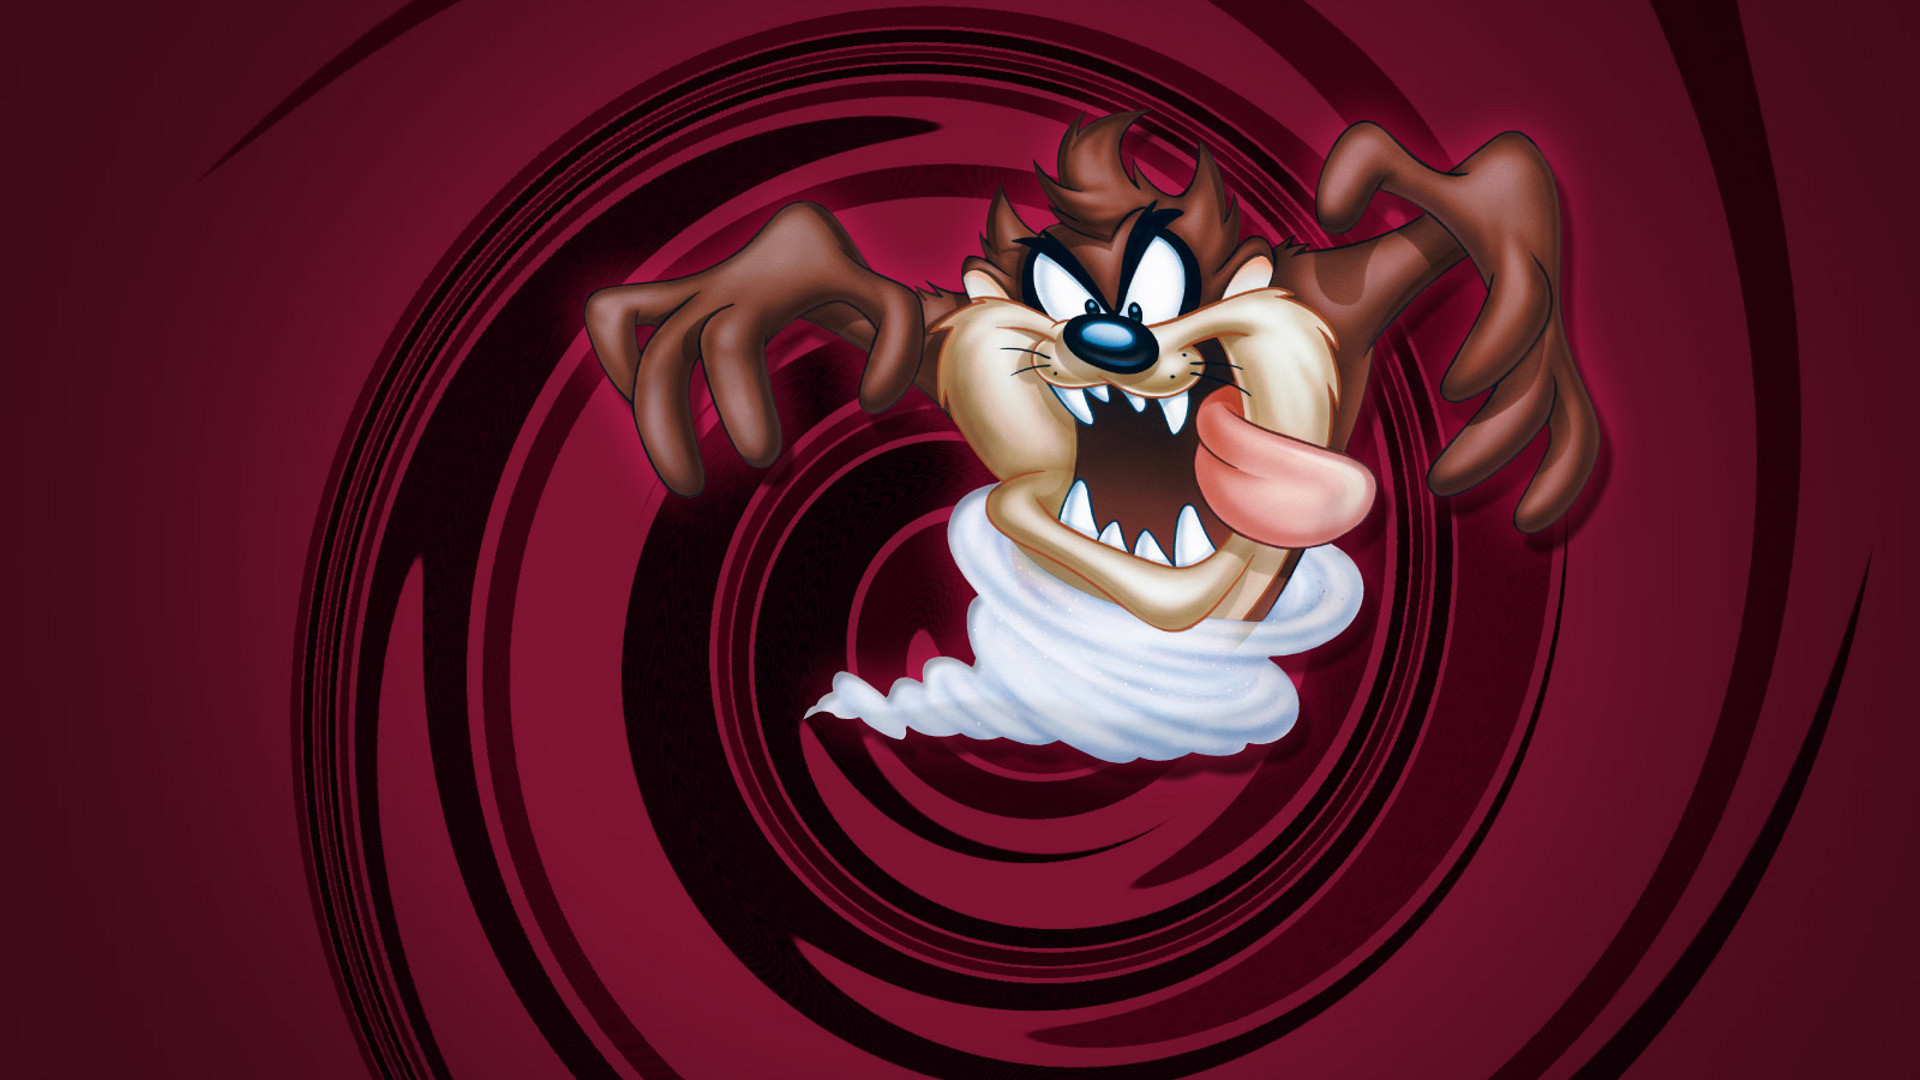 1920x1080 The Tasmanian Devil, real name is Taz from Looney Tunes